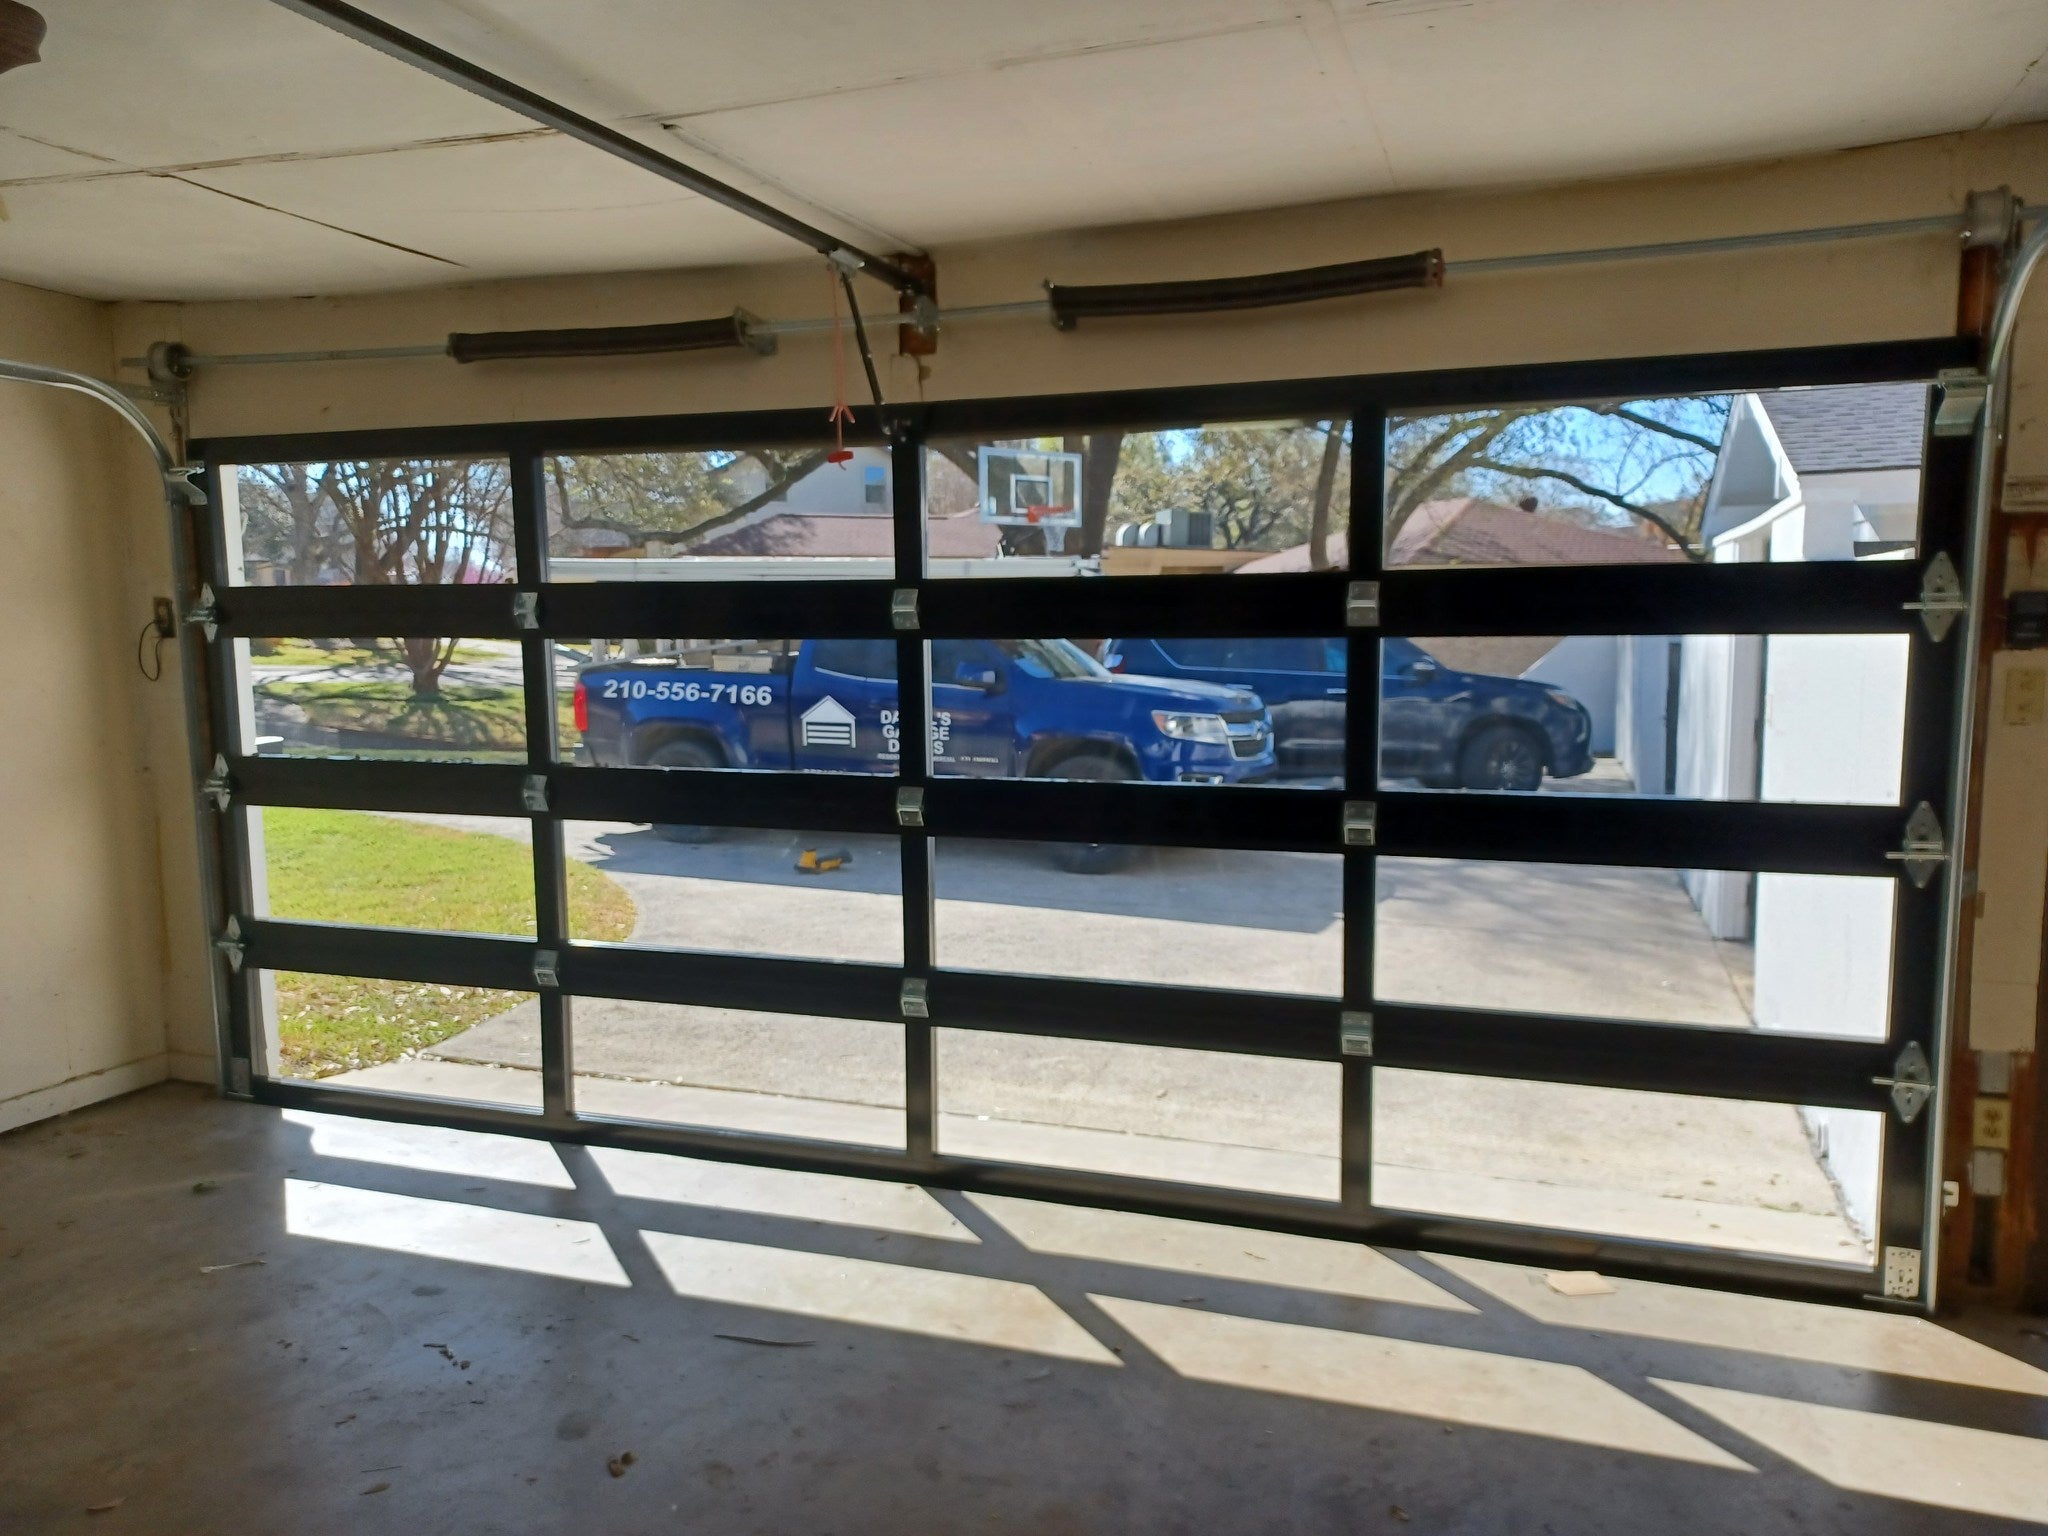 18 FT Wide By 10 FT Tall Full View Garage Door Matt Black Finish With Clear Glass